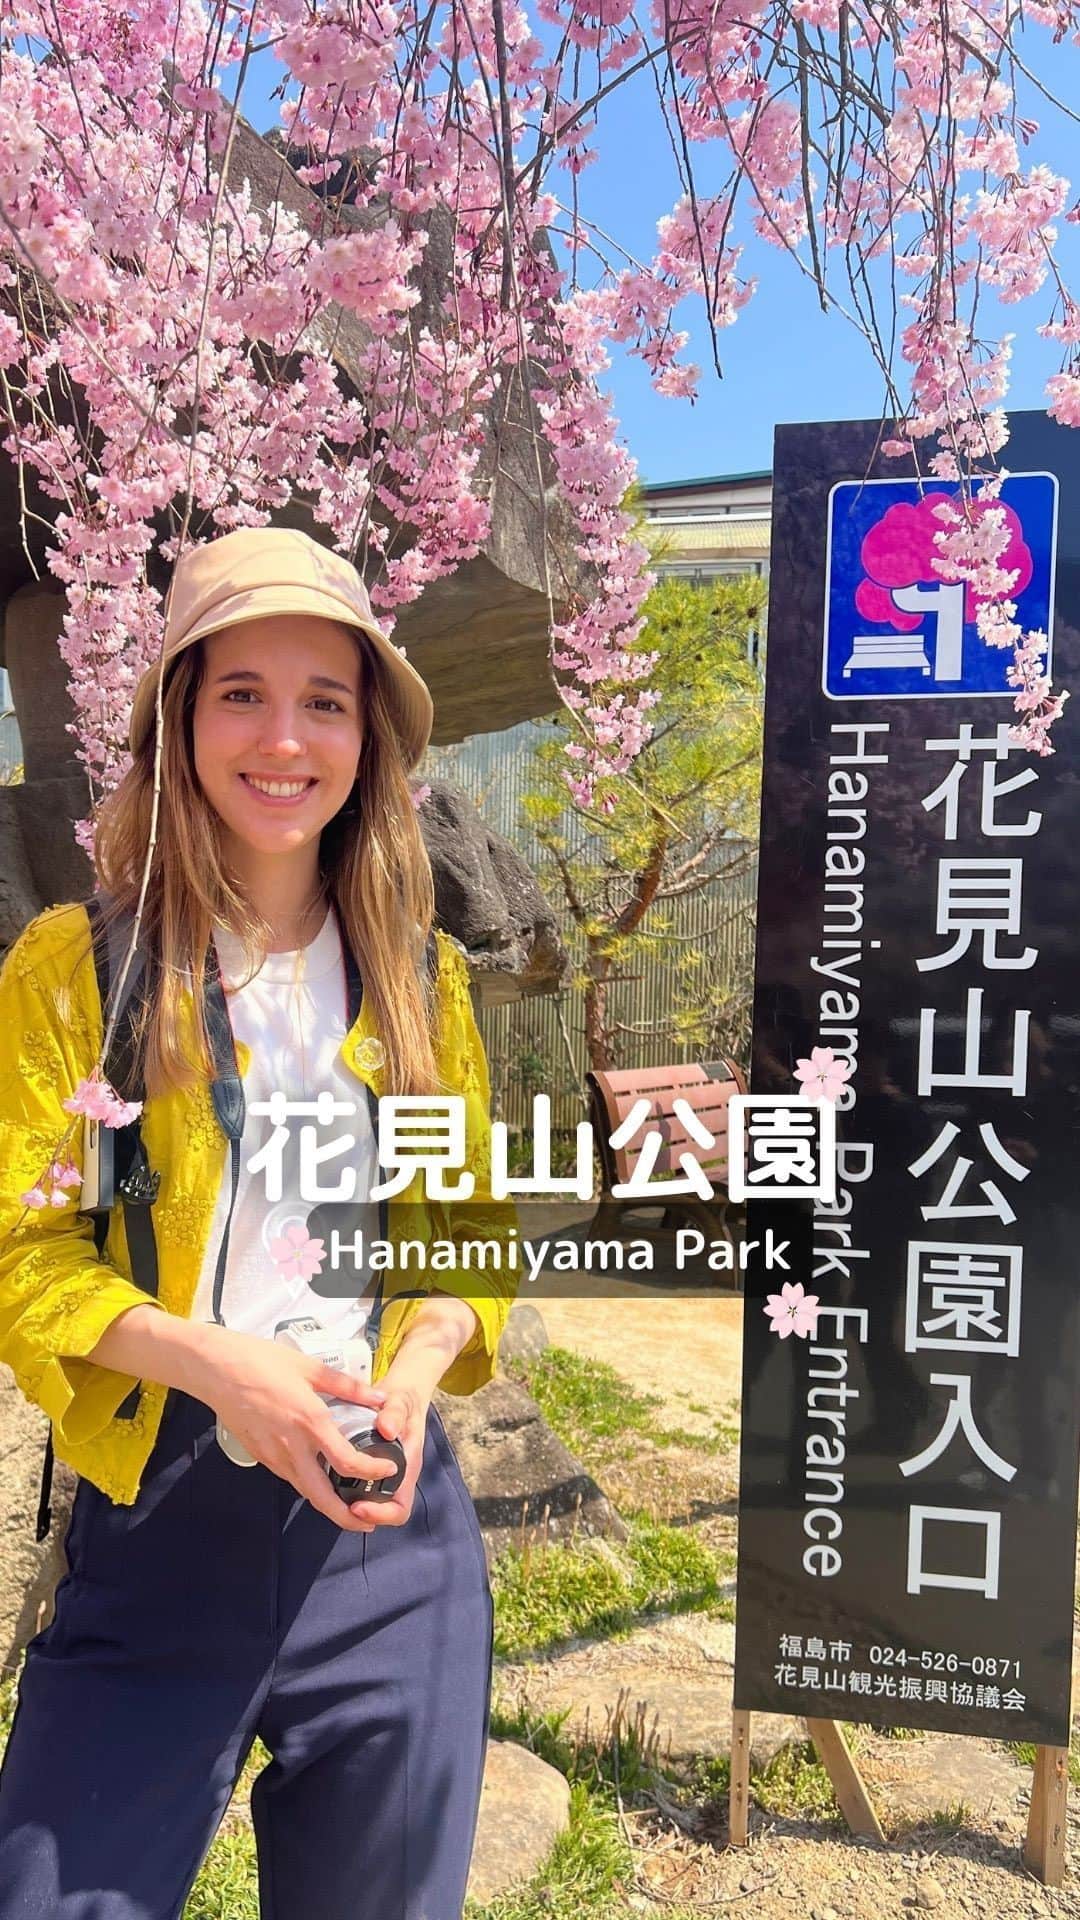 Rediscover Fukushimaのインスタグラム：「Thank you for joining our Facebook livestream today! 🥰💕  Here are some of Hanamiyama’s FAQs:  🌸Where is Hanamiyama Park?🌸  Hanamiyama Park is located in Fukushima City, Fukushima prefecture, Japan!  🌸When is Hanamiyama in full bloom?🌸  Hanamiyama Park has many different flowers, which each bloom at different times (approx. from late March to the end of April). 💐  Most cherry blossom varieties at the park are now in full bloom, so we’d recommend visiting ASAP! You can check daily updates of the park on their social media channels!  🌸Can you go by car?🌸  You can, but it’s more convenient to go by bus, since the parking lot is a little bit far away!   🚌 There is a shuttle bus that runs from Fukushima Station - the round trip costs 500 yen.🚌  🌸How long does it take to see the park?🌸  There are three walking trails, which each take:  🚶30 min. 🚶45 min. 🚶60 min.  We covered the 60 min. one today, and it was so worth it! The view of the city from the top was amazing.   We’d recommend going with plenty of time, as you can easily spend three or four hours there! Especially if you love taking pictures! 🤩  🌸If you have any other questions, please let us know in the comments!   Or check our Facebook livestream to see more (link in stories!)  And don’t forget to save this reel for your next visit to Hanamiyama Park. 🌸  #hanamiyama #hanami #visitfukushima #fukushima #japan #japanese #japantrip #japantravel #beautifuldestinations #visitjapanjp #visitjapanes #visitjapanus #visitjapanca #visitjapanfr #sakura #springinjapan #aprilinjapan #tohoku #wanderlust #japanlover #flowerview #flowerviewing #sakuratime #cherryblossoms #flowers #fukushimaprefecture #fukushimagram #travel #travelgram #hanamiyamapark」